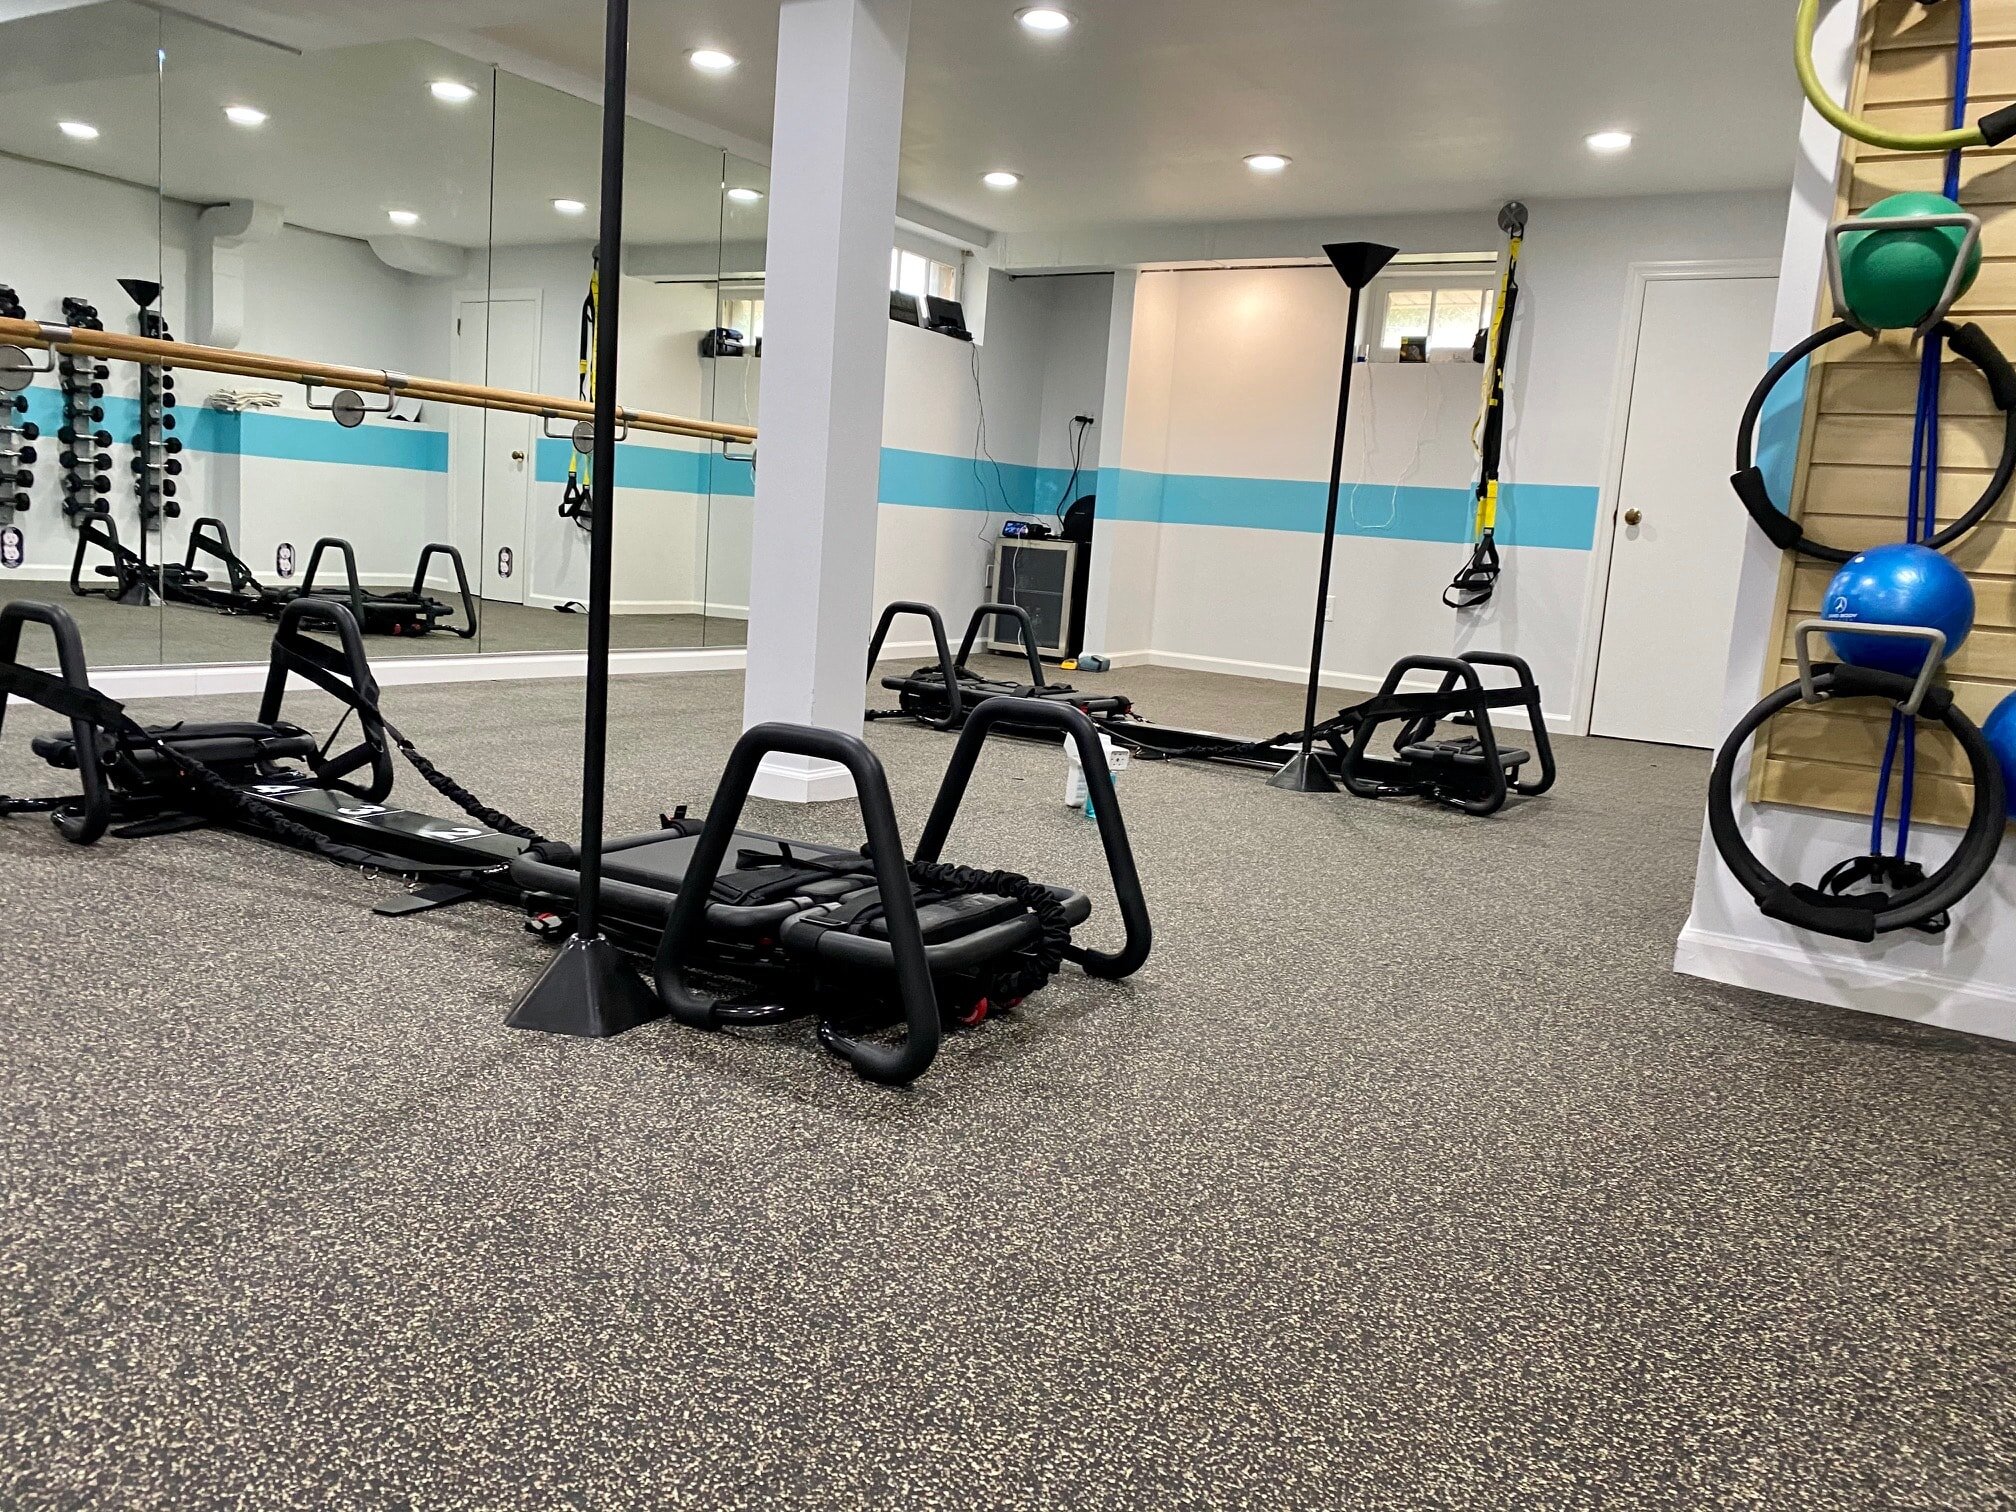 Best Personal Trainer in Bergen County NJ - Pam Newman - Body Rock Fitness Studio in Teaneck New Jersey - MicroReformer and Tabata Classes (3)-min.jpg